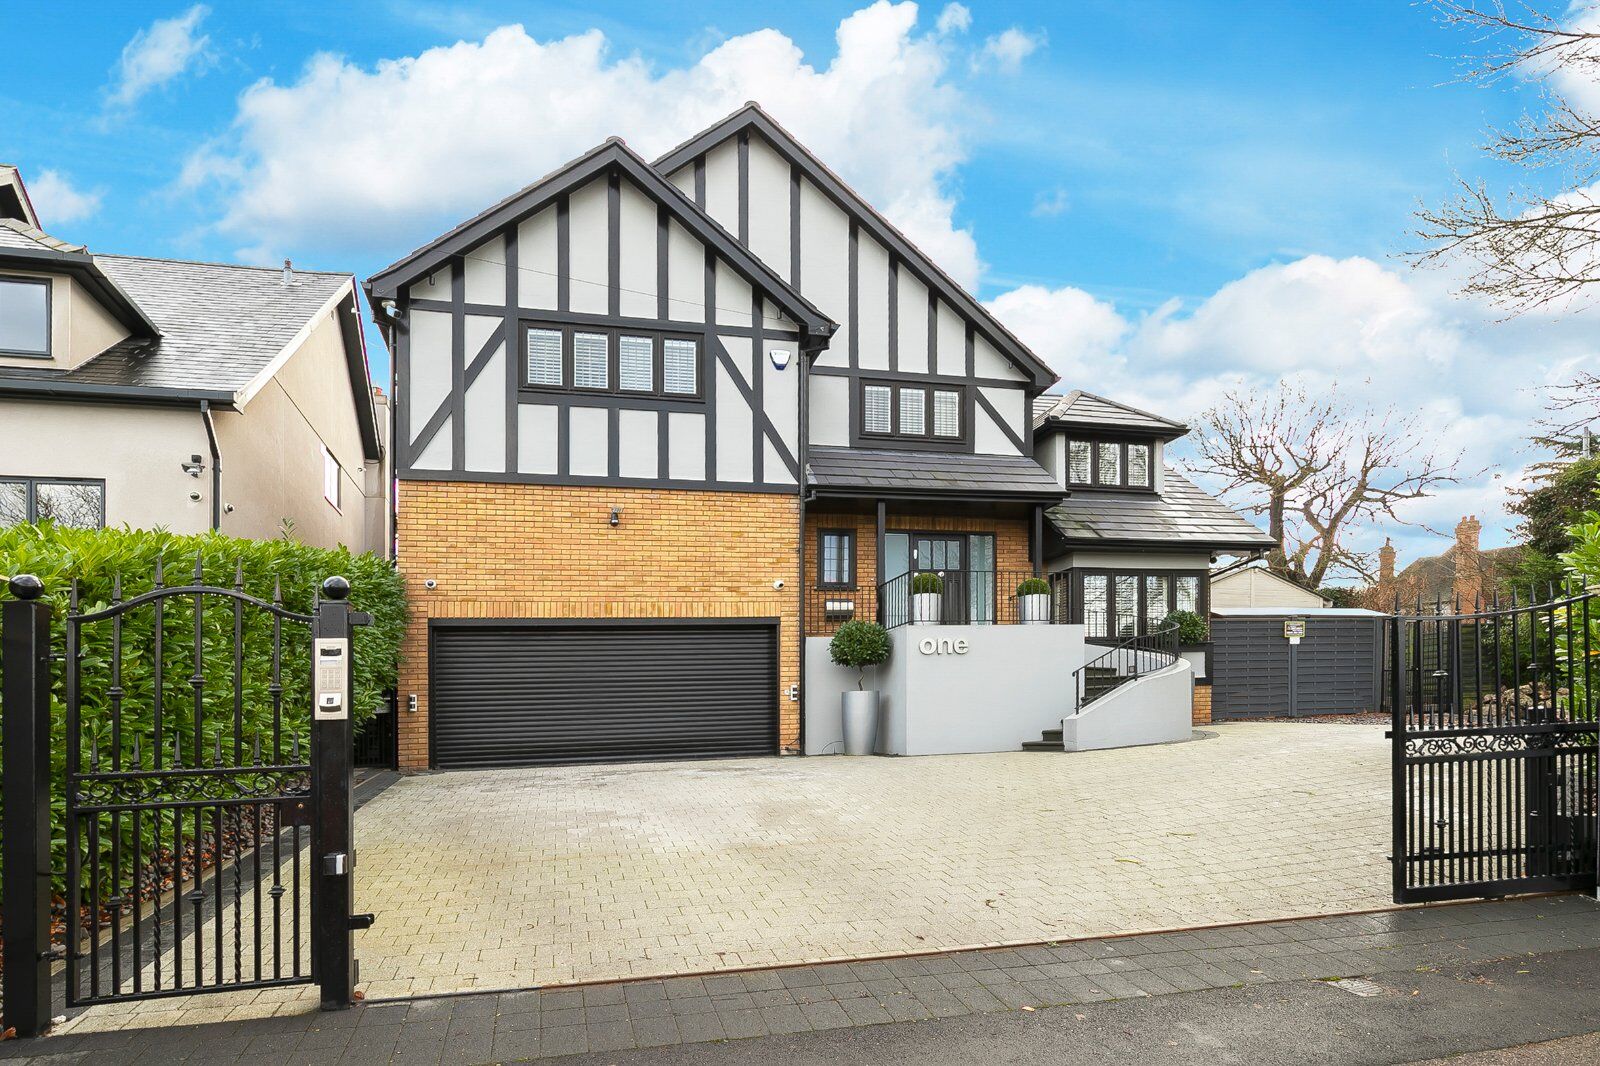 5 bedroom detached house for sale Eleven Acre Rise, Loughton, IG10, main image